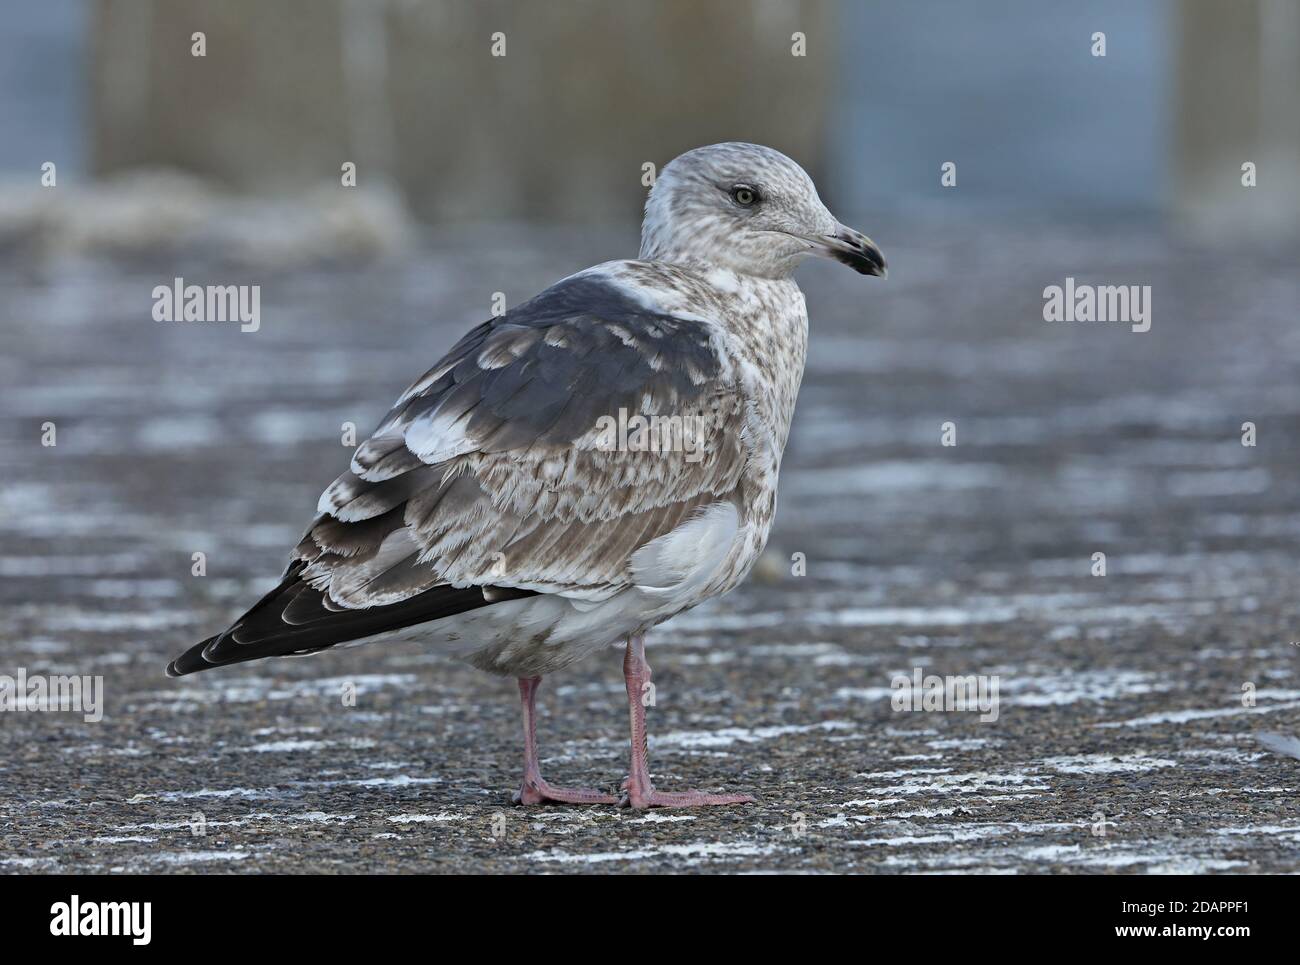 Slaty-backed Gull (Larus schistisagus) second winter standing on harbour wall  Choshi, Chiba Prefecture, Japan      February Stock Photo